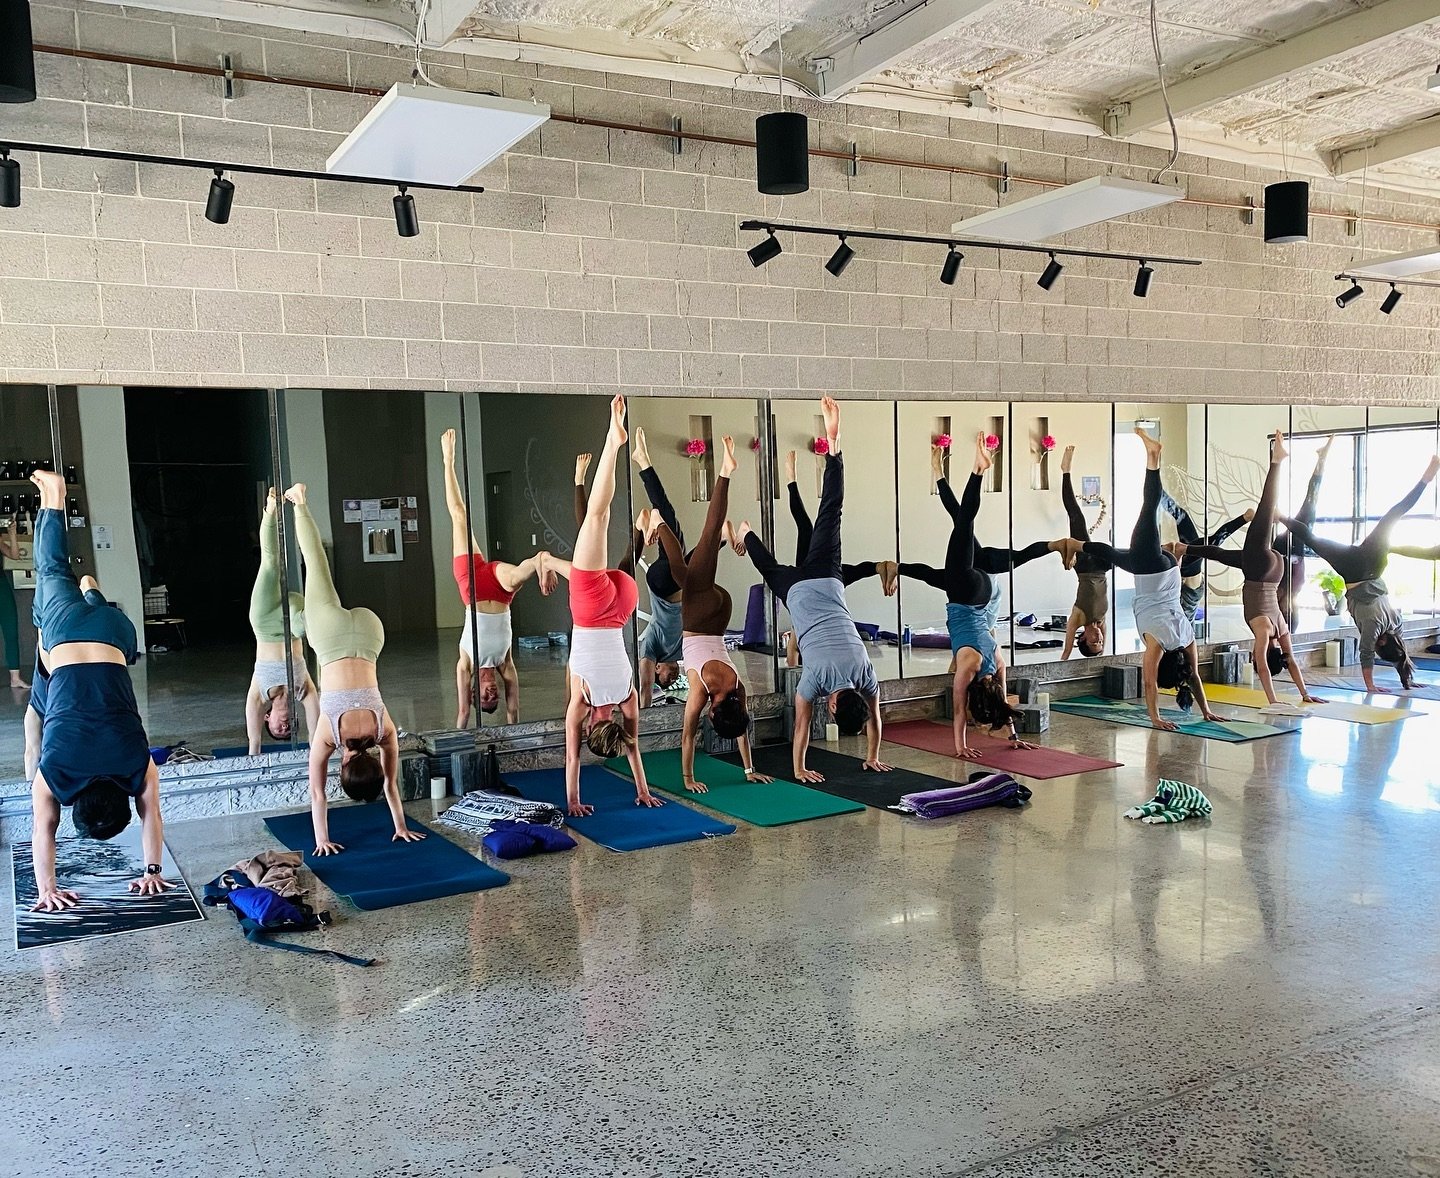 Happy Fri-YAY!! We hope your week was productive, fun and you got some yoga in. We&rsquo;re here for you this weekend:
⠀
Saturday: 9am and 10:30am Vinyasa 
Sunday: 9:30am Vinyasa / 11am Slow Flow / 5pm Restore